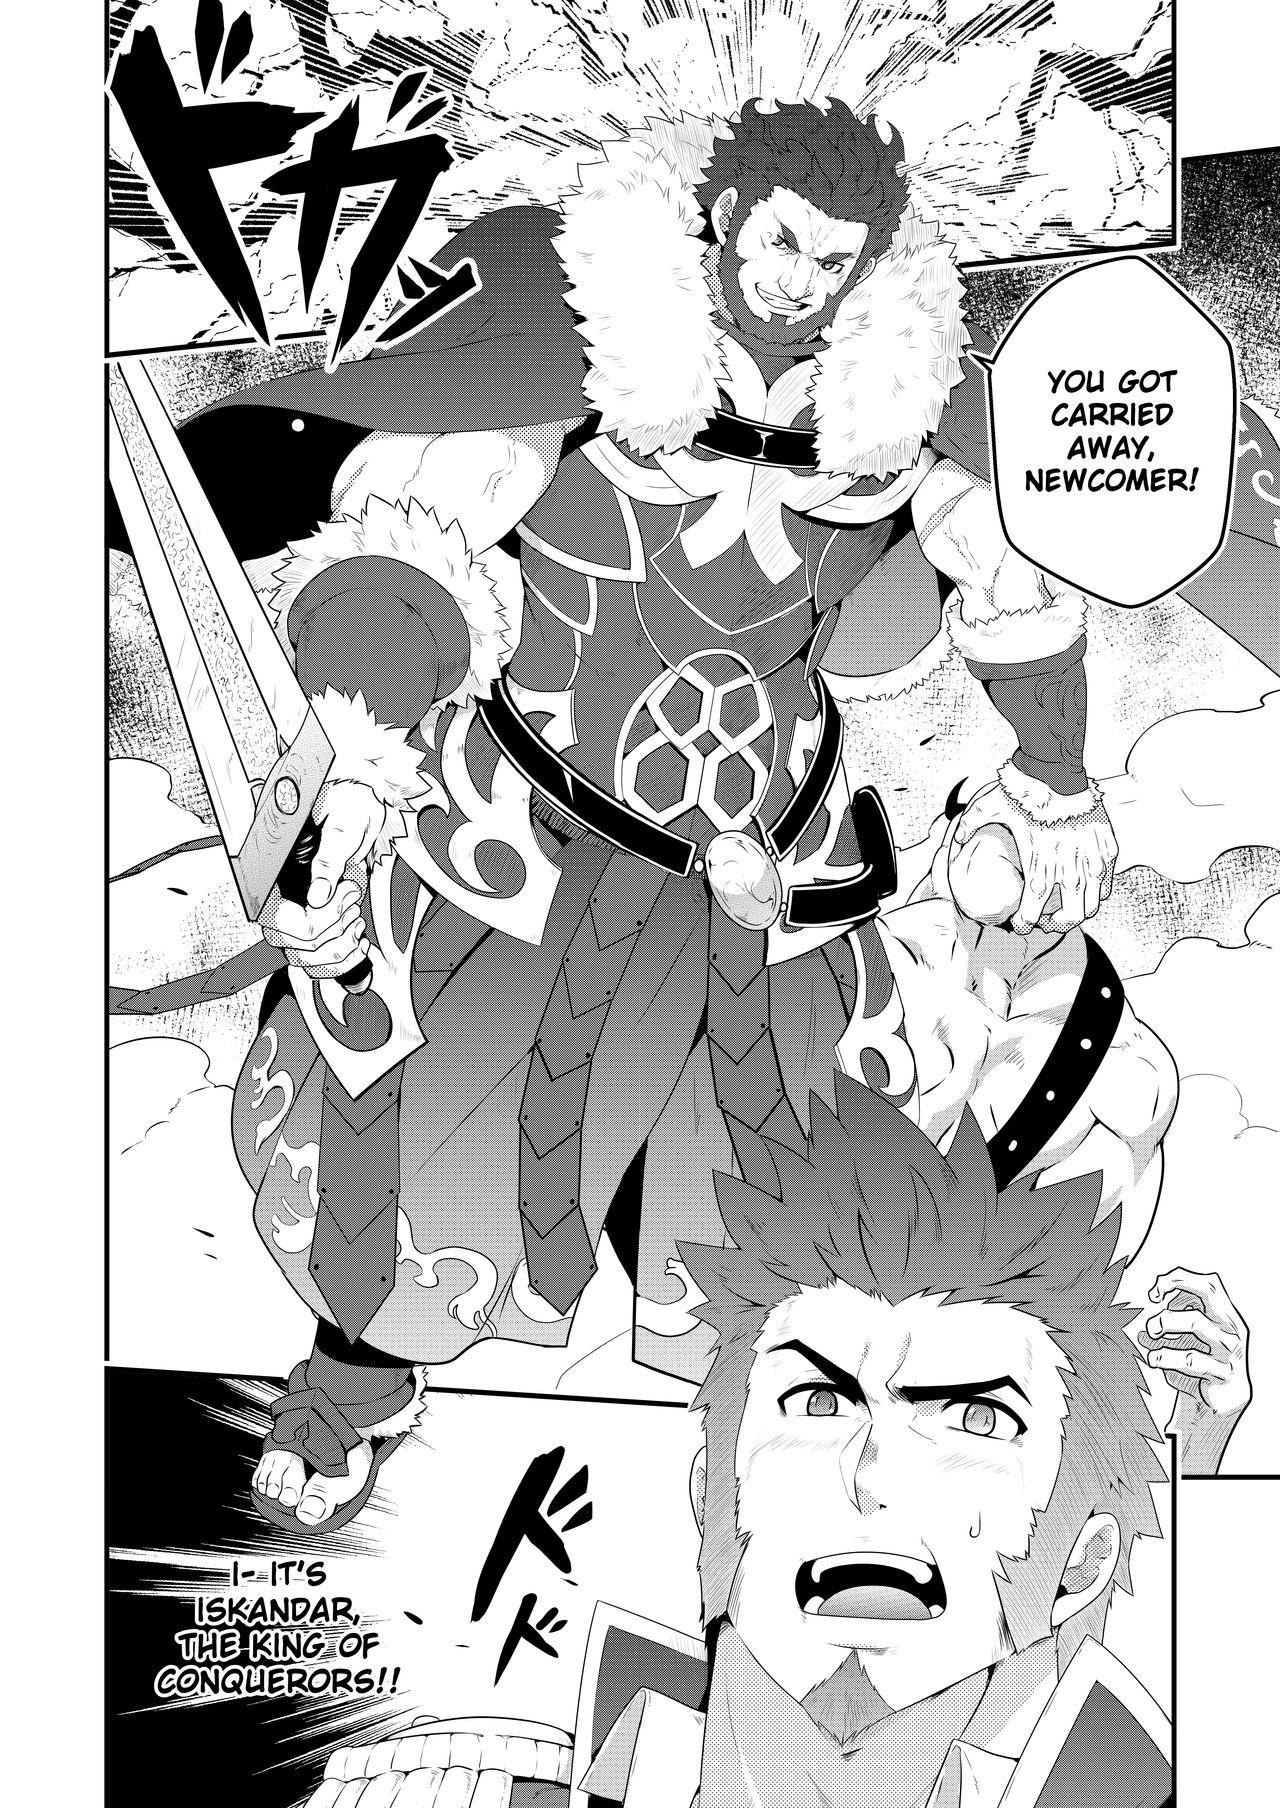 Riding ADMIRATION - Fate grand order Indonesia - Page 8